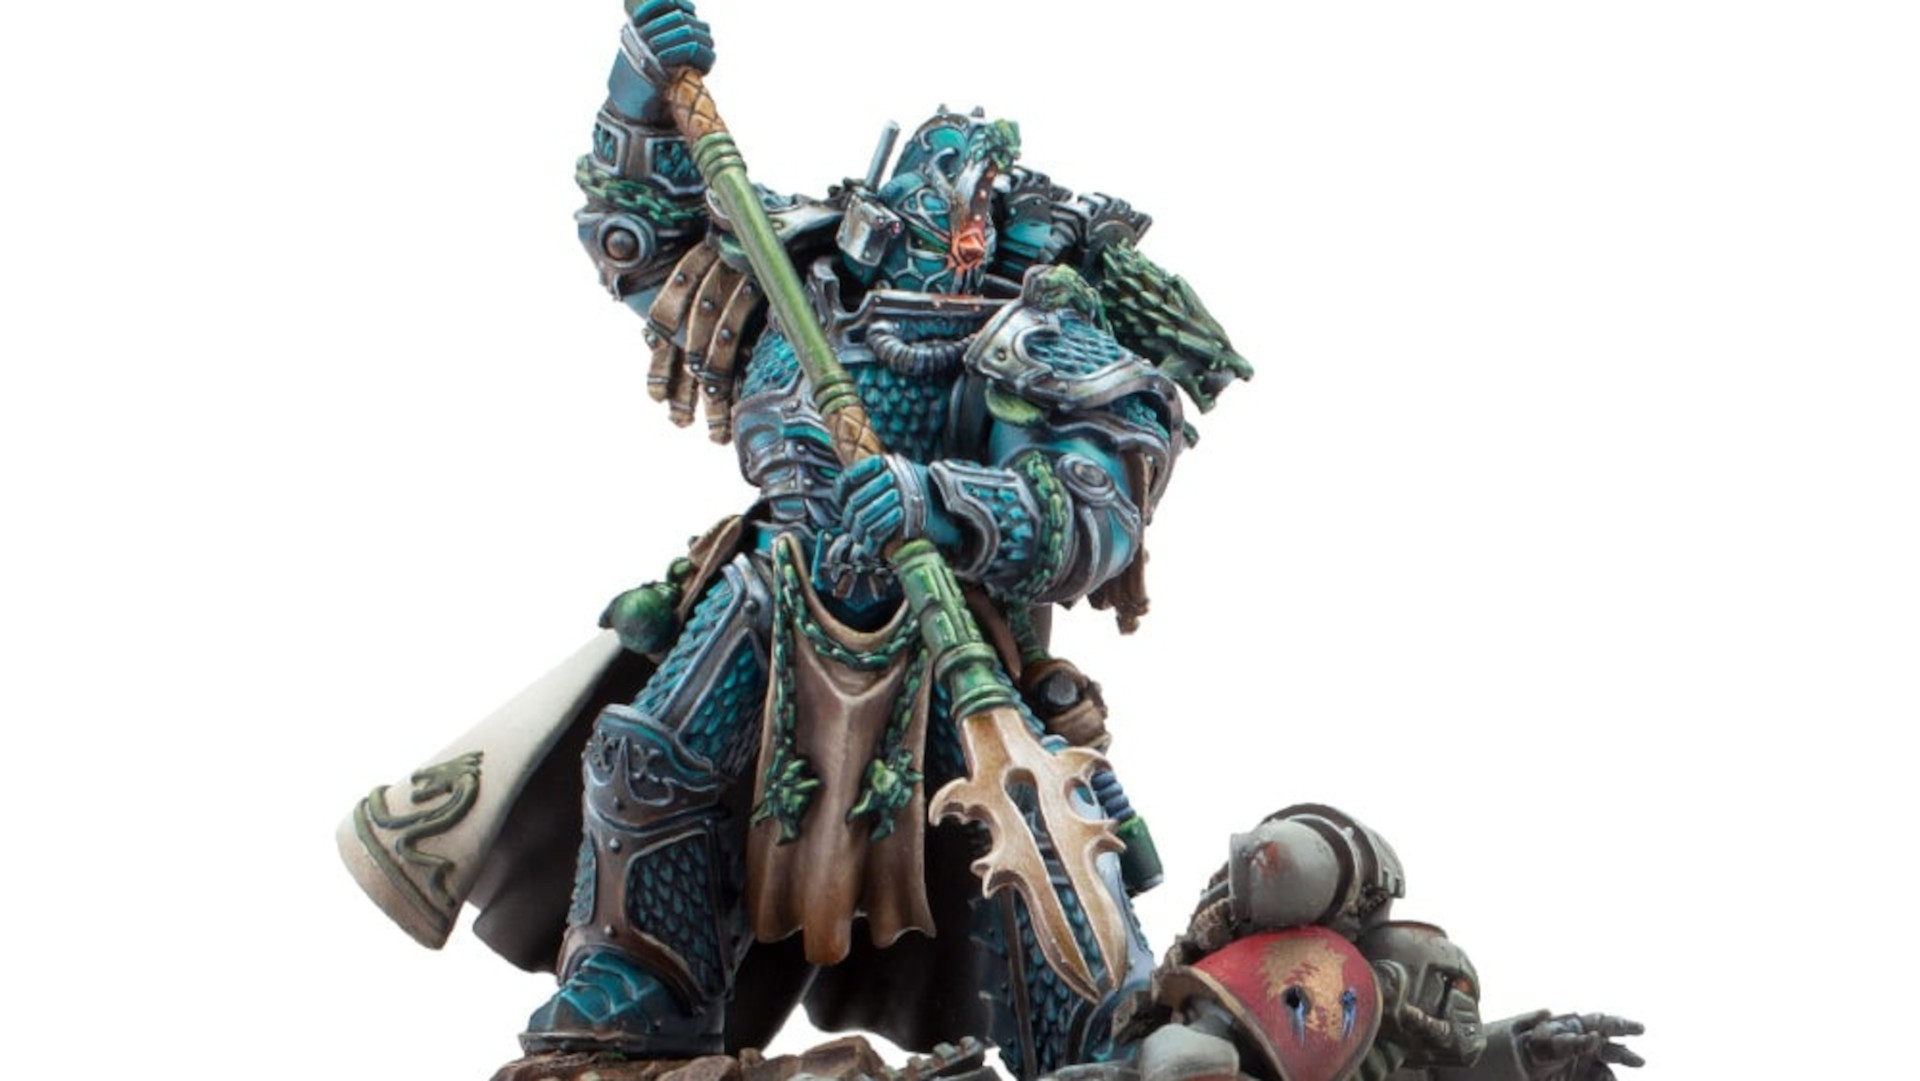 Warhammer 40k primarchs guide - Games Workshop image showing the Horus Heresy Forge World resin model of Alpharius Omegon